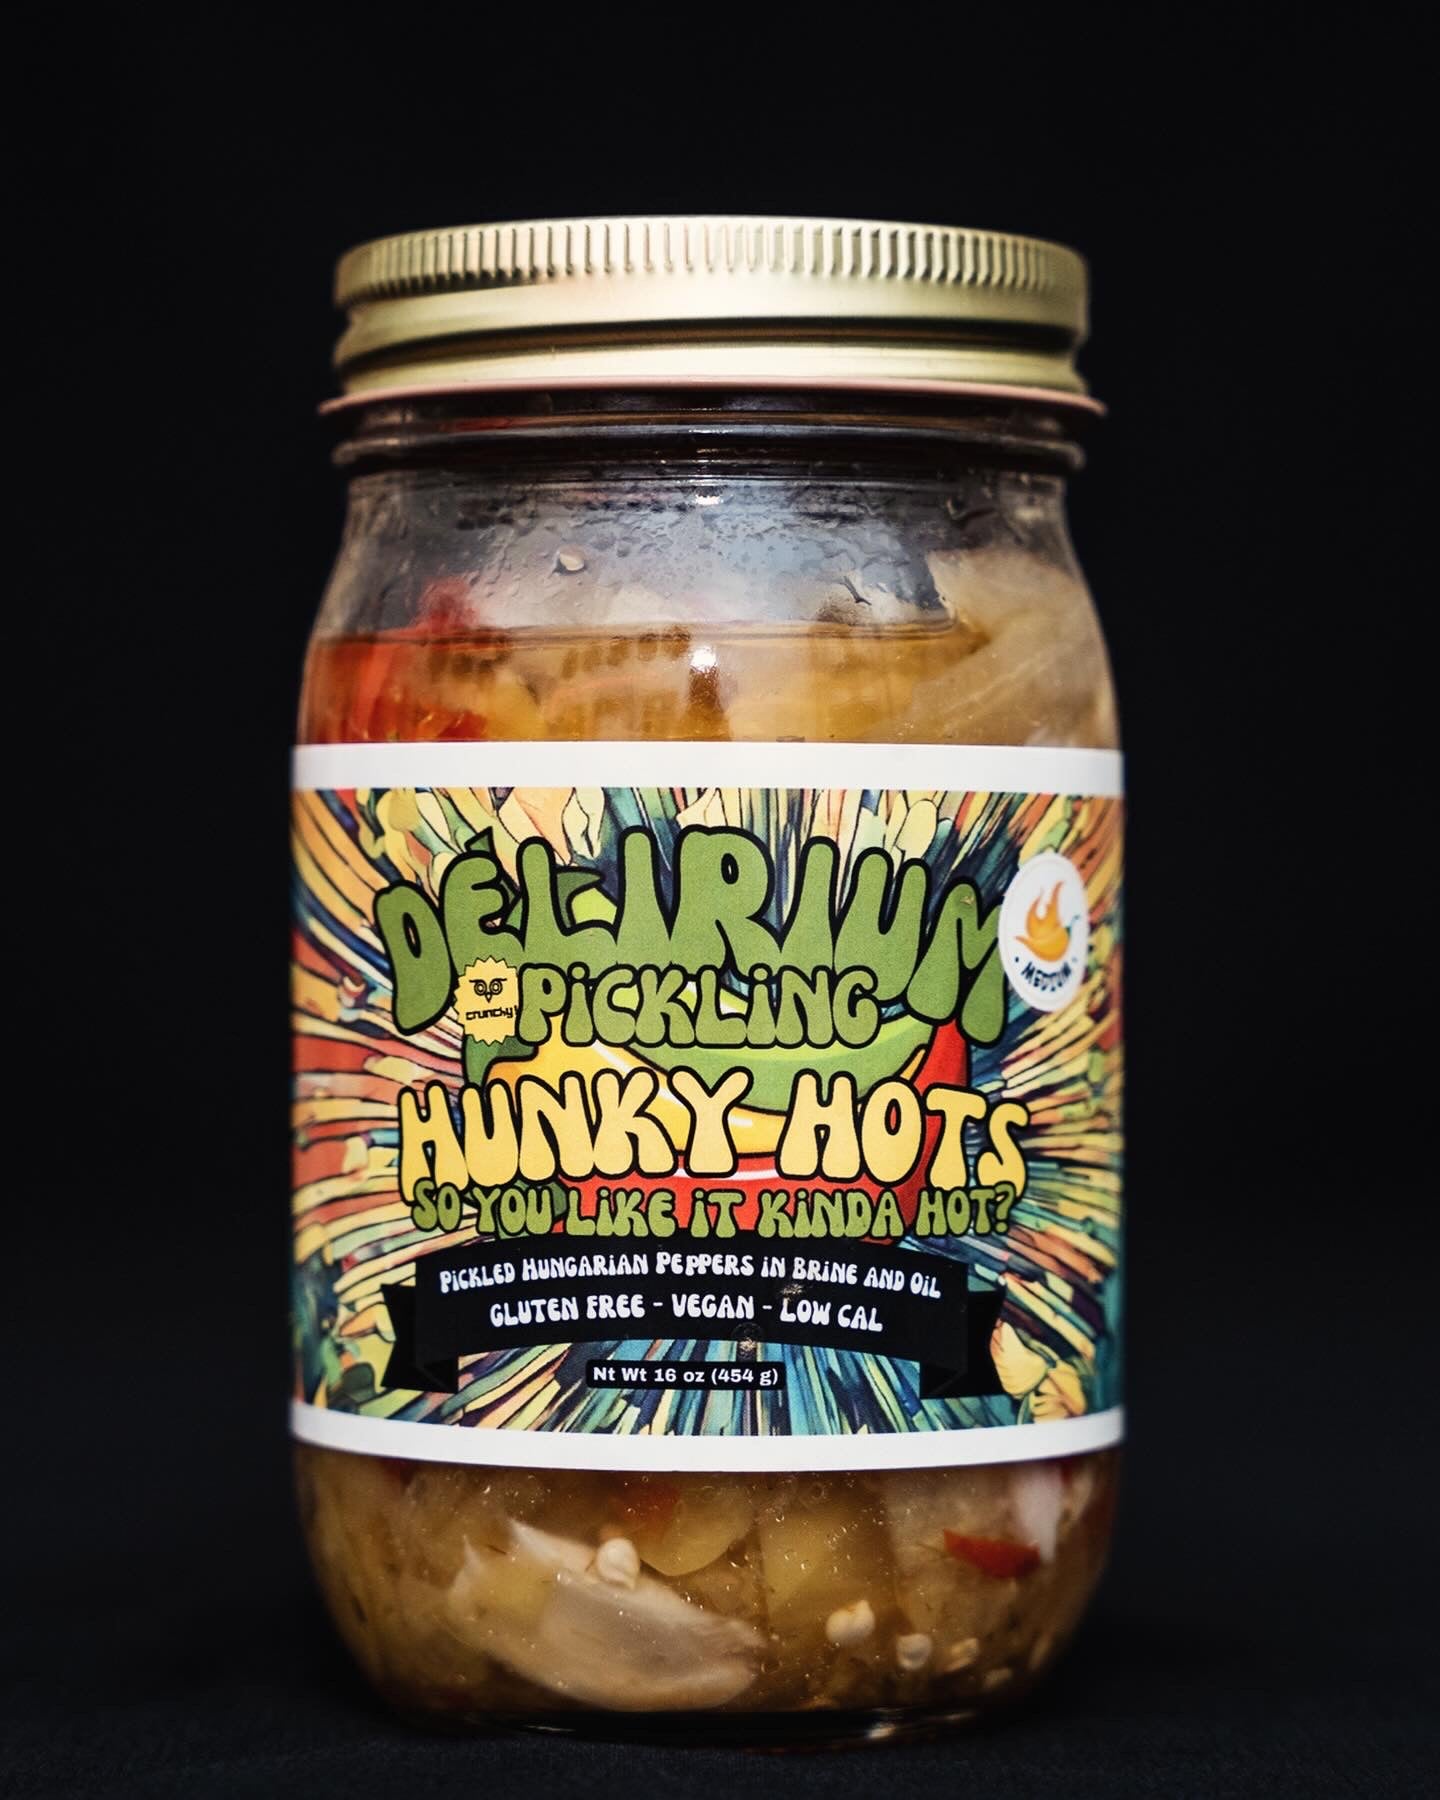 Hunky Hots (Pickled Hungarian Peppers)